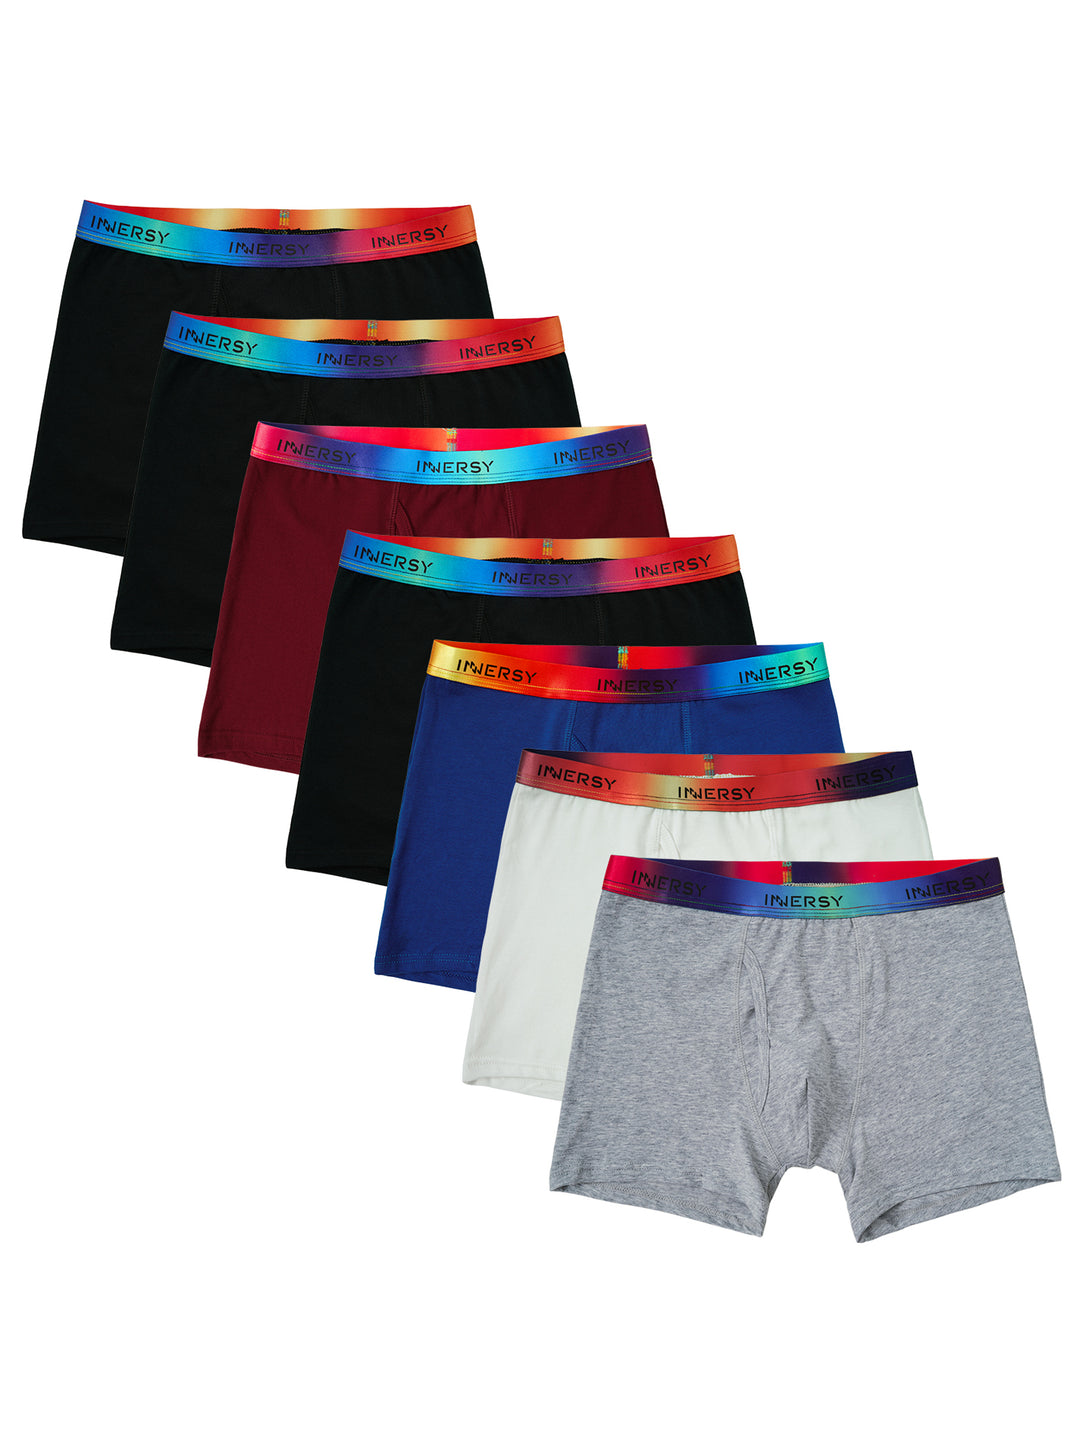 Boys Aged 8-18 Boxer Briefs 7-Pack